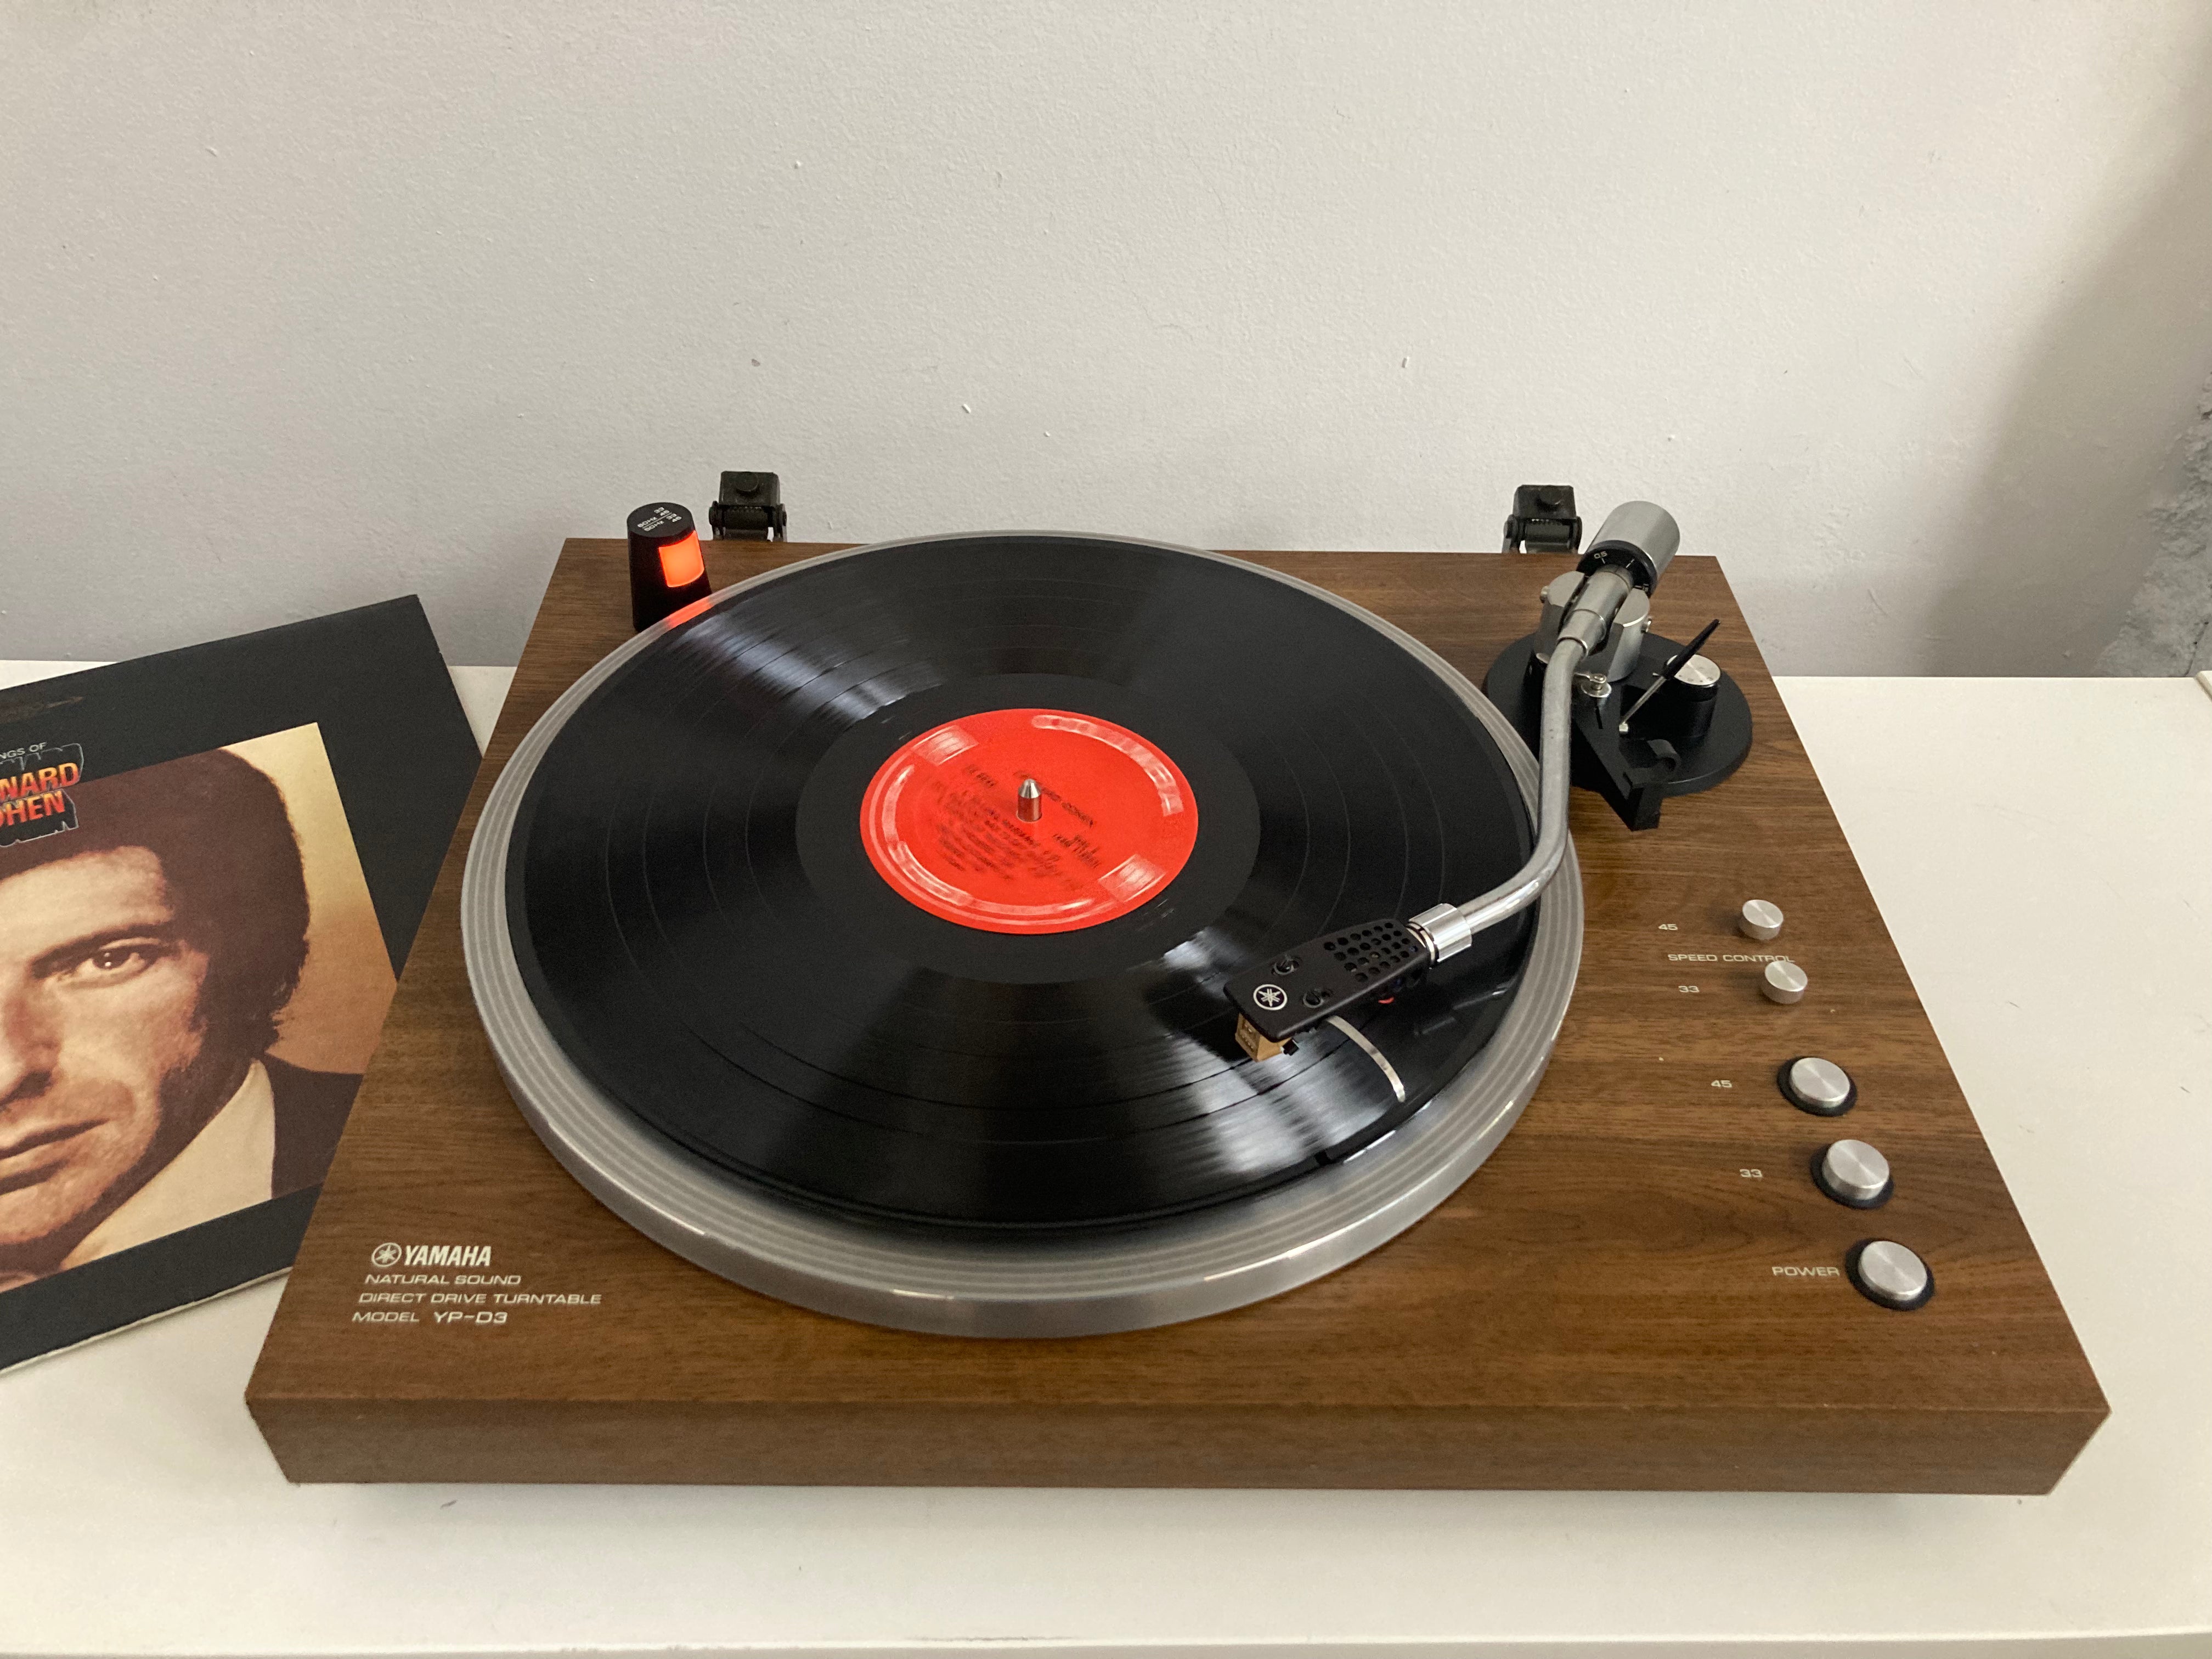 Rare YAMAHA YP-D3 (1978) Direct Drive turntable in exquisite